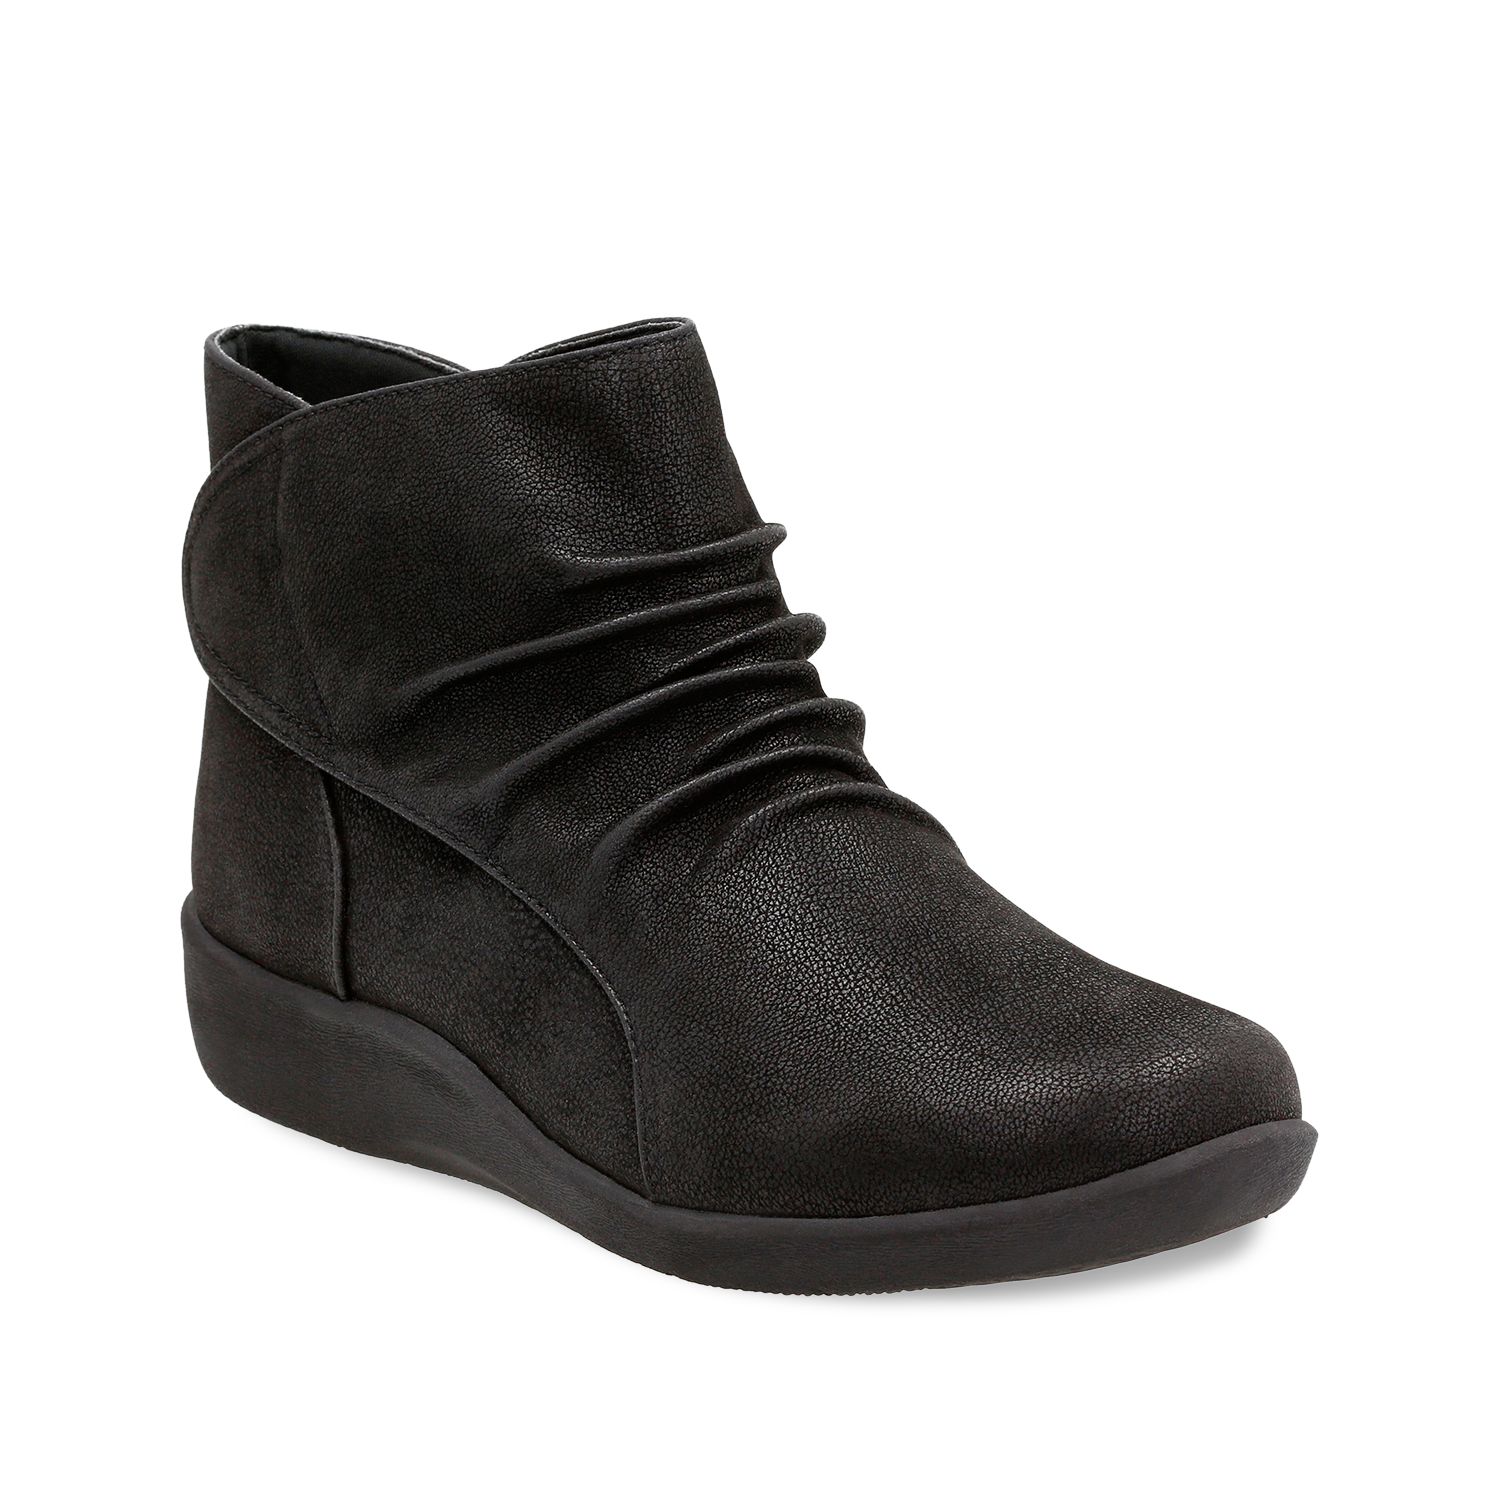 clarks cloudsteppers womens boots